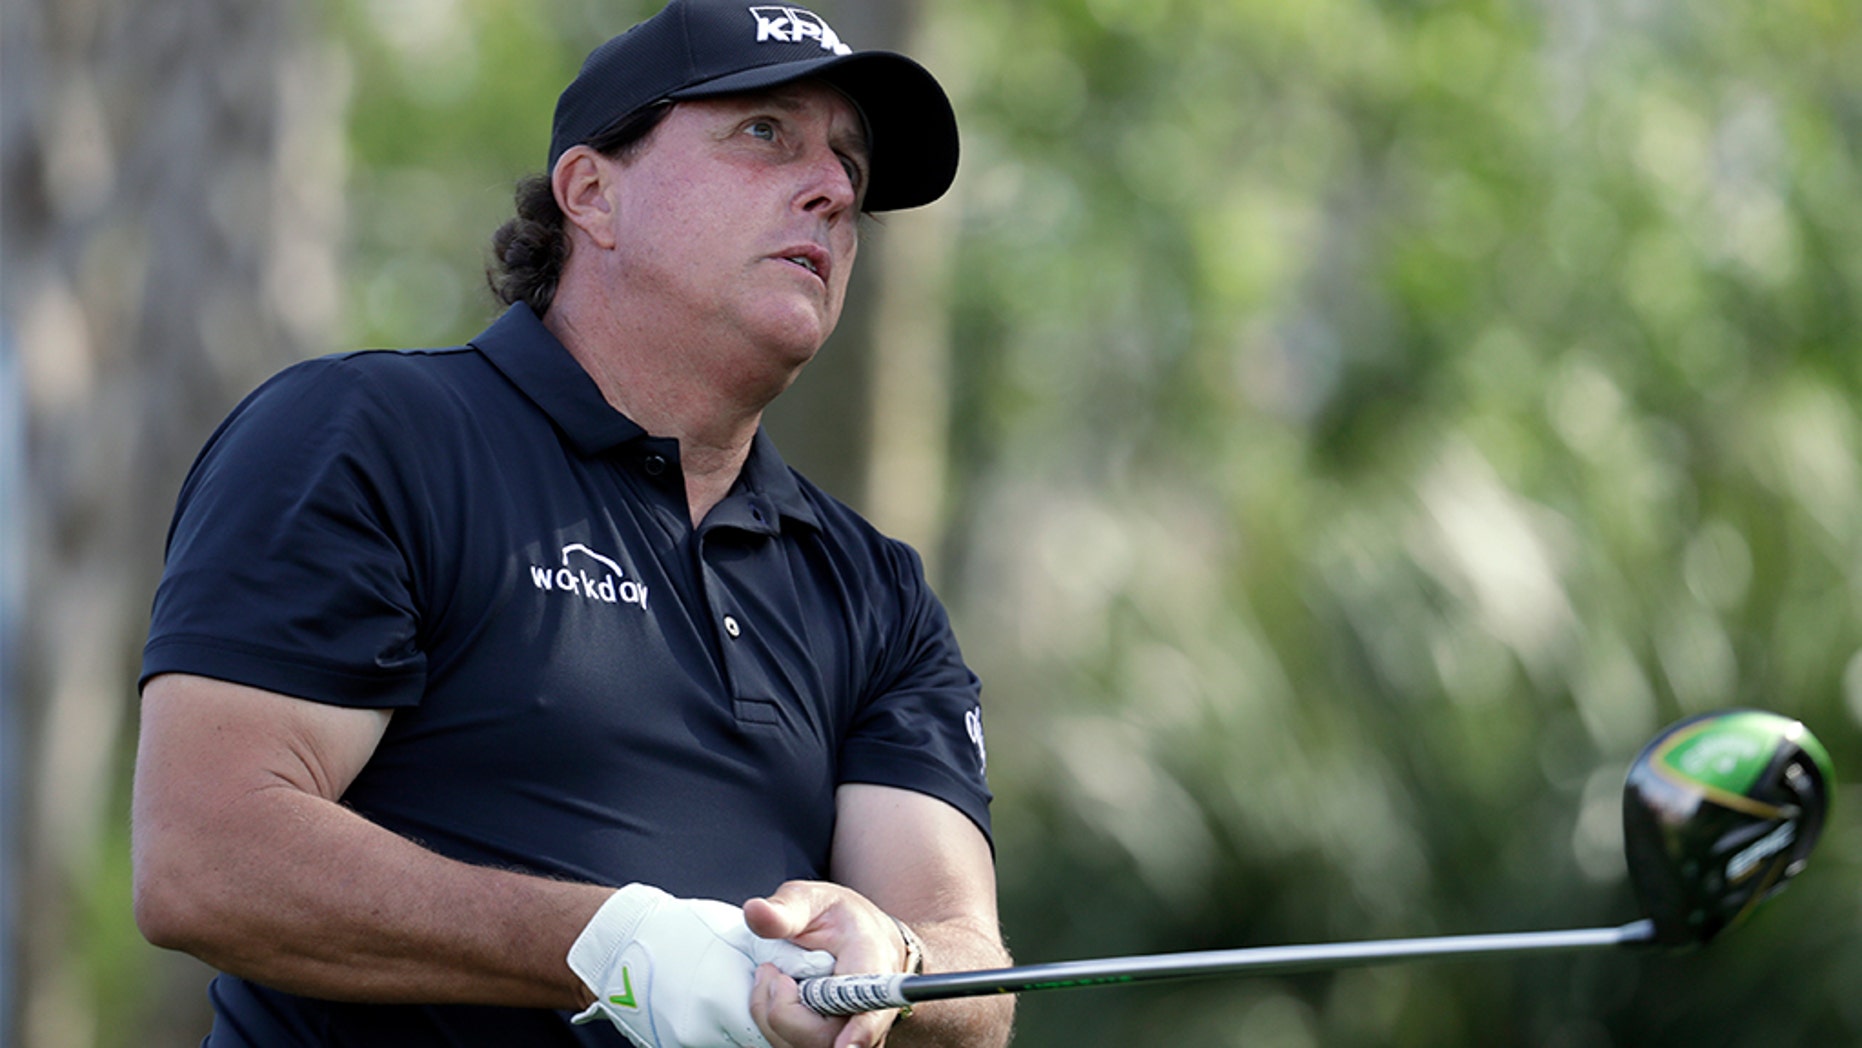 Golfer Phil Mickelson said on Twitter Thursday that it was part of 